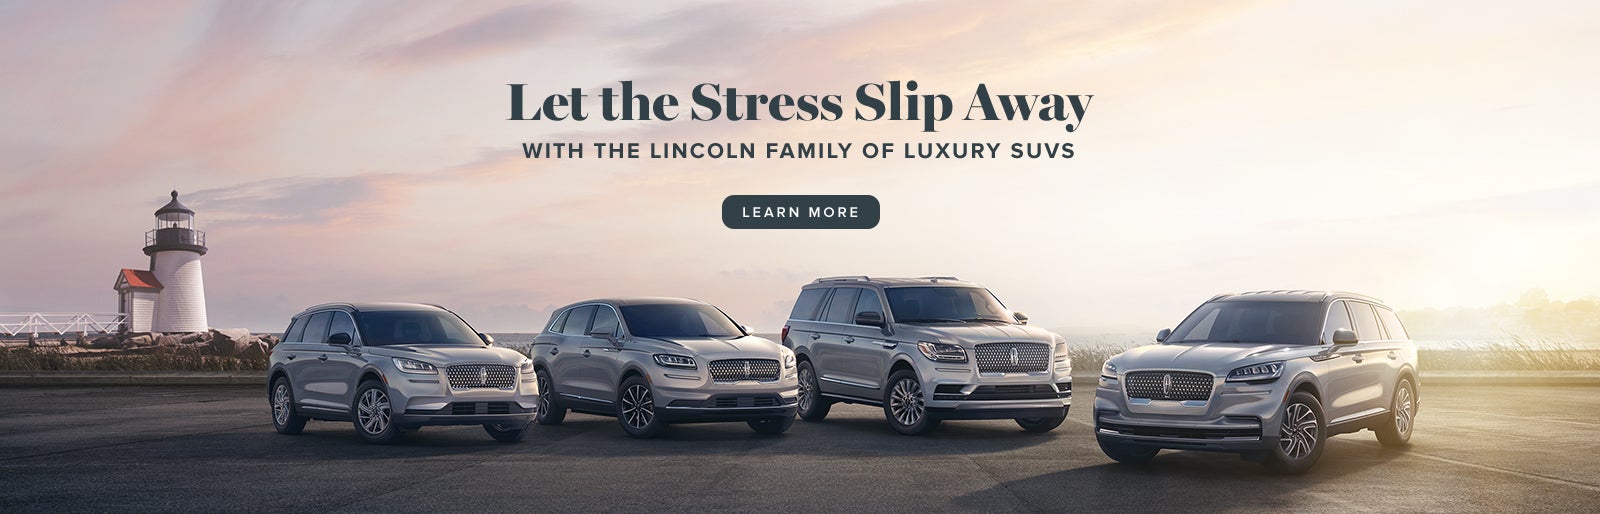 The Lincoln Family of Luxury SUVs